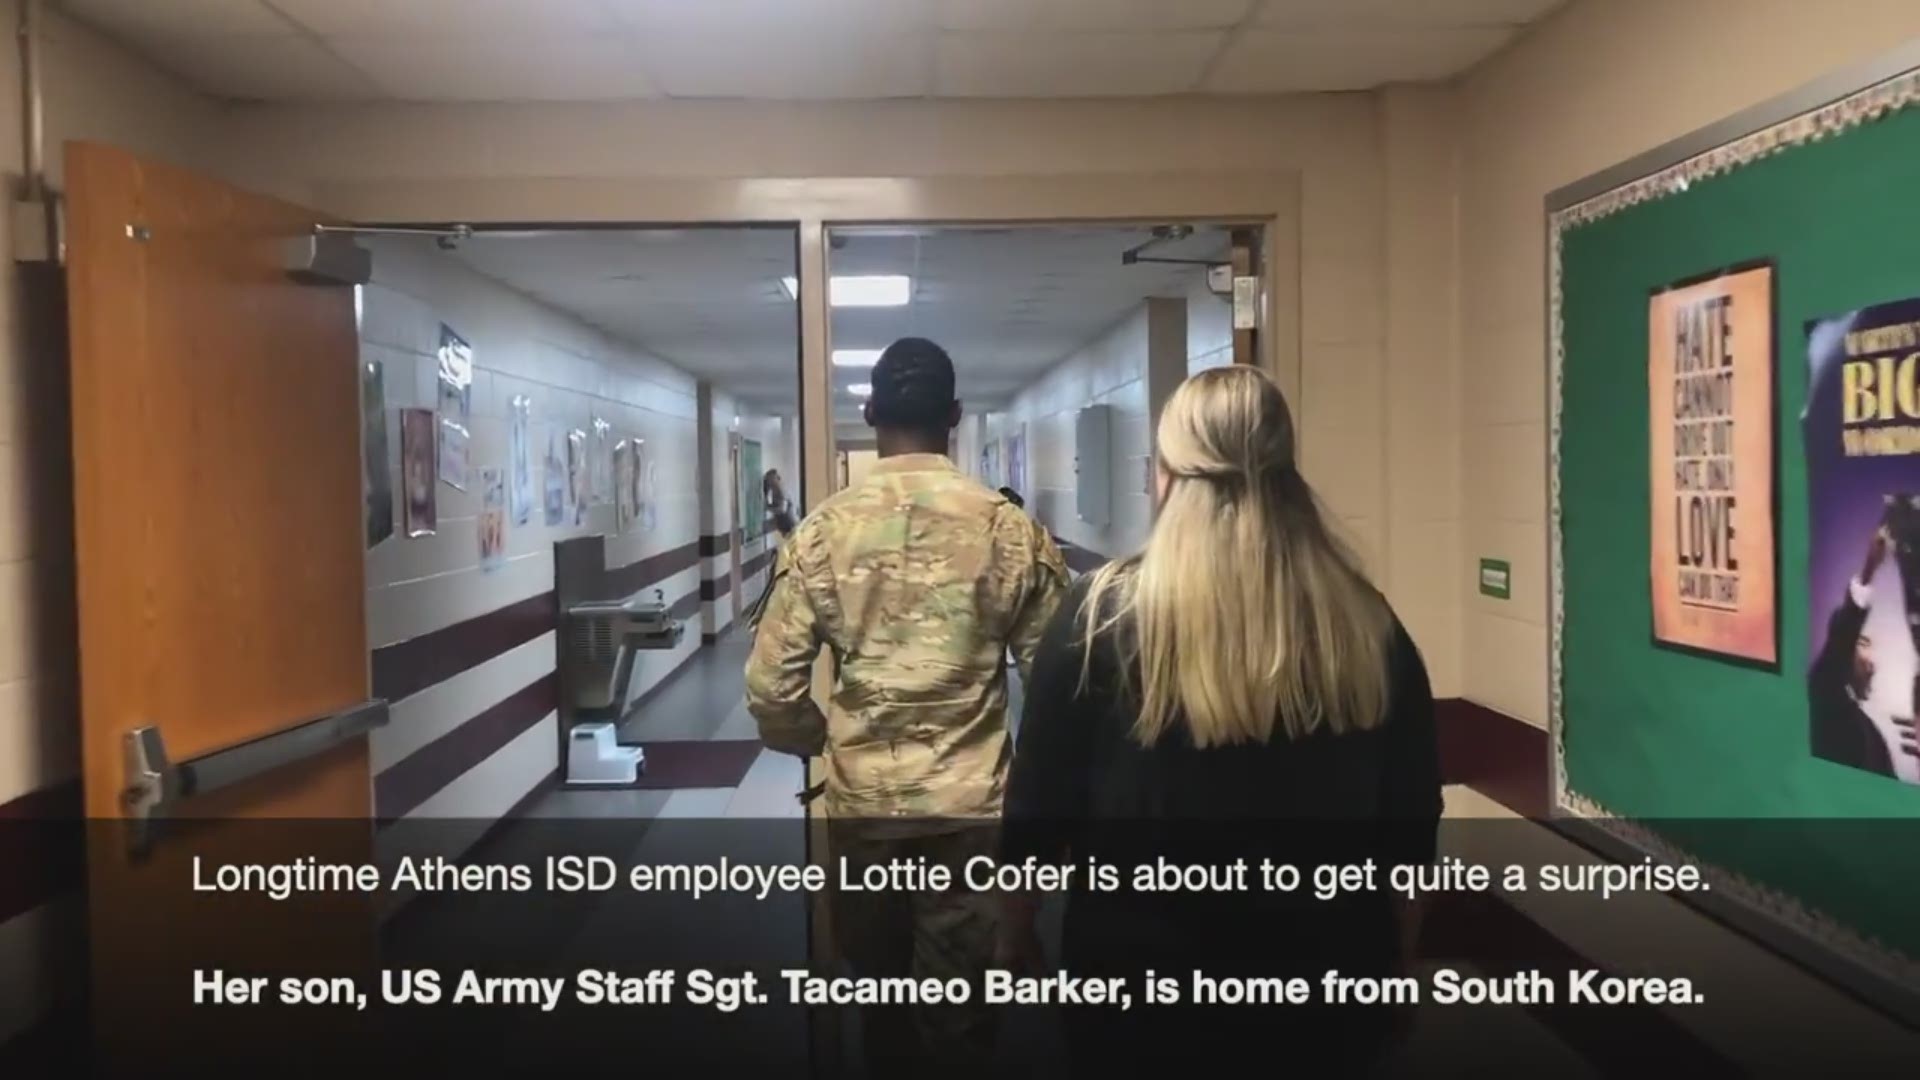 Lottie Cofer has dedicated her life to serving the kids at Athens ISD. The school decided to honor her with the surprise of a lifetime.